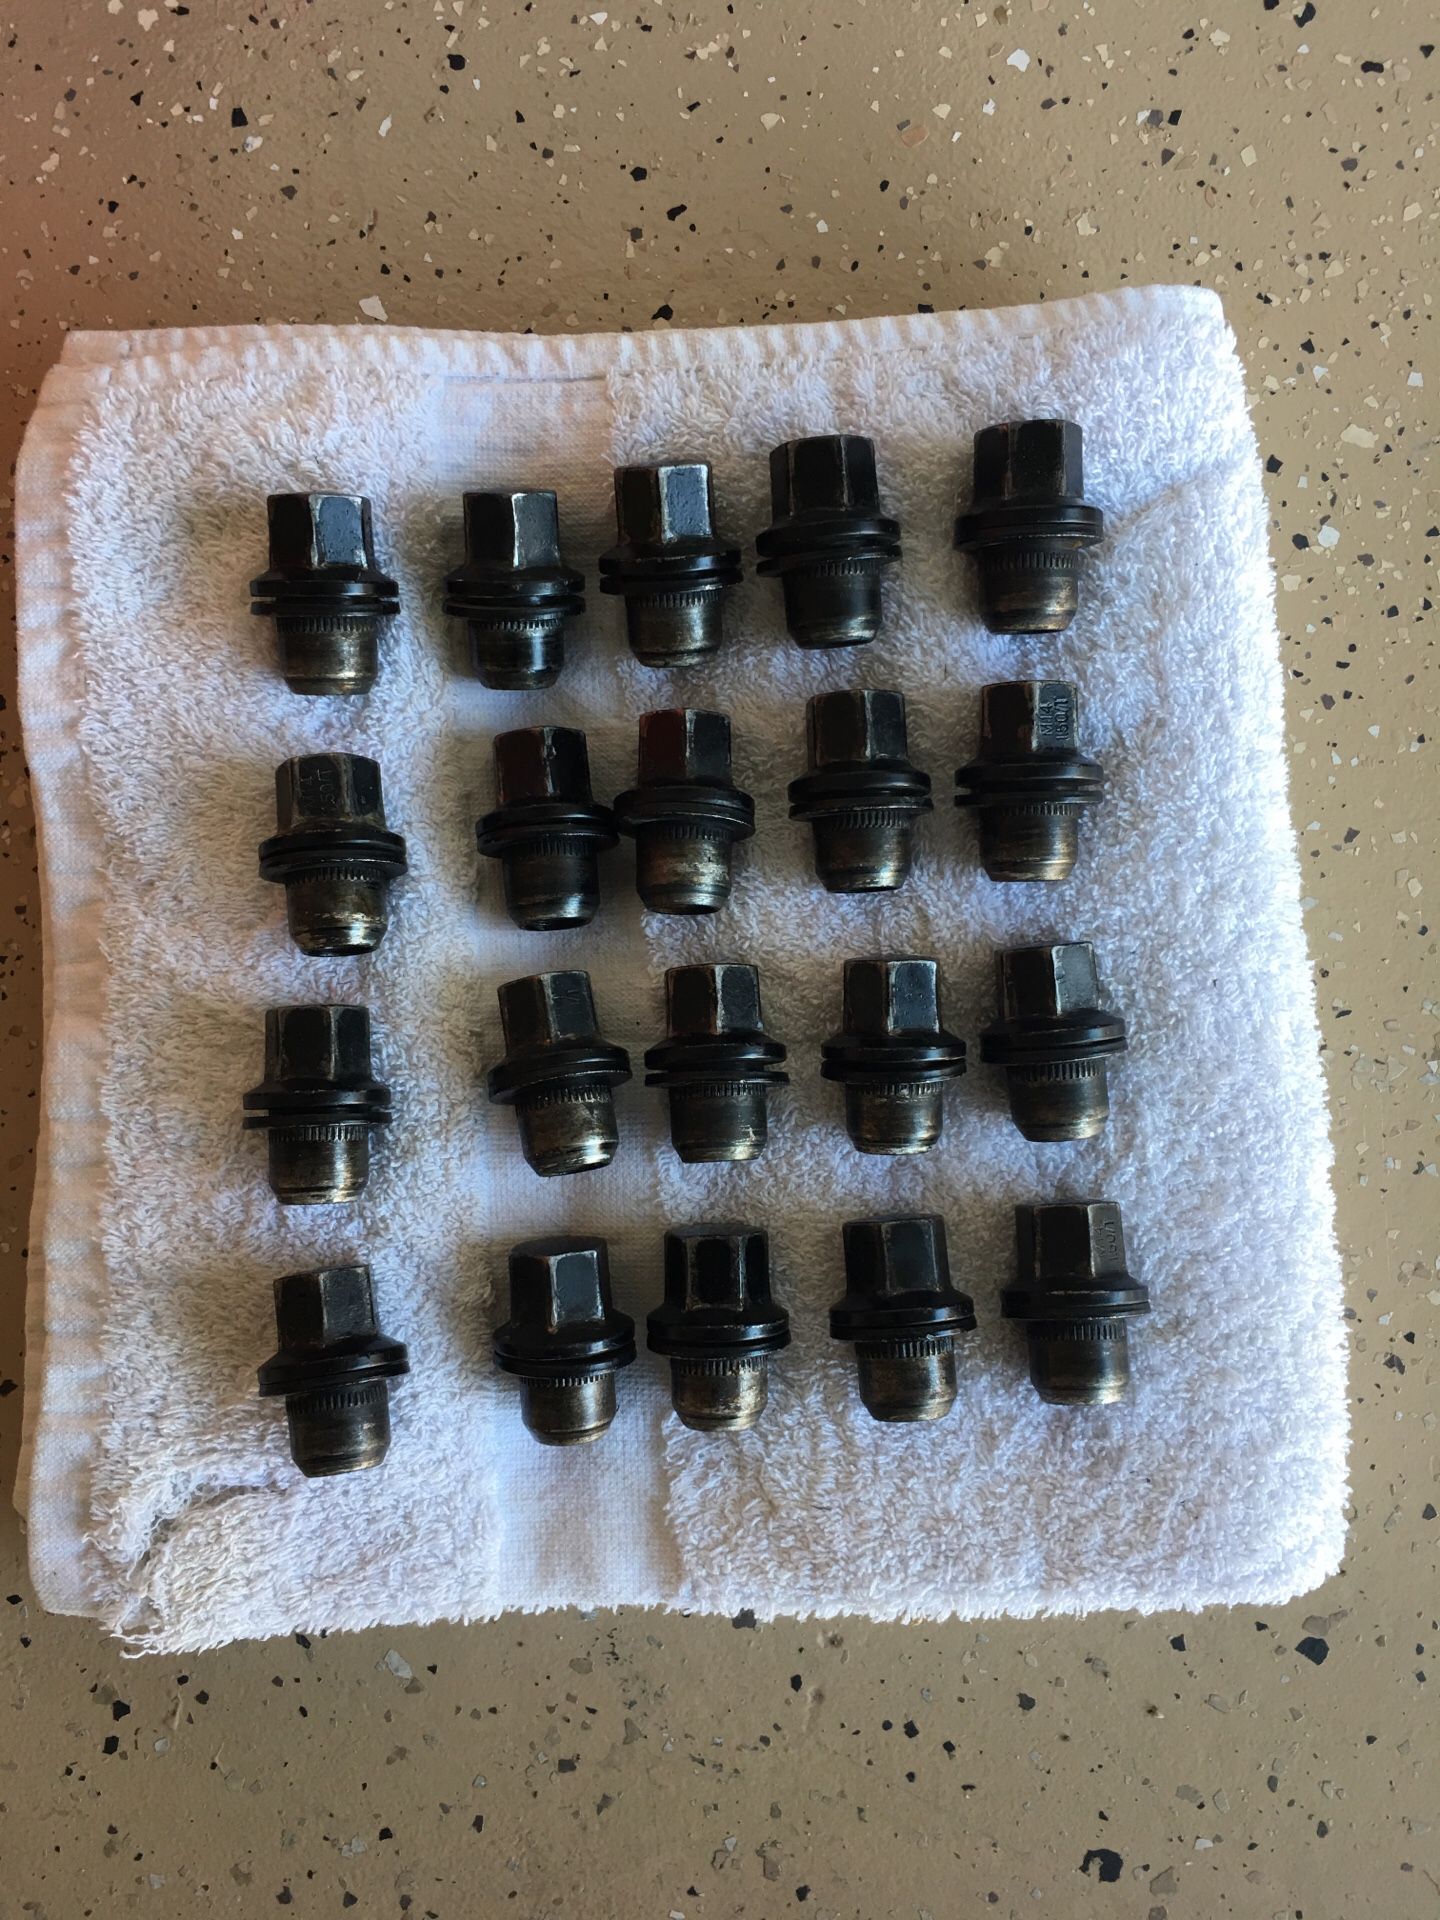 LUG NUTS, Toyota, Chevy, Ford, Truck Parts